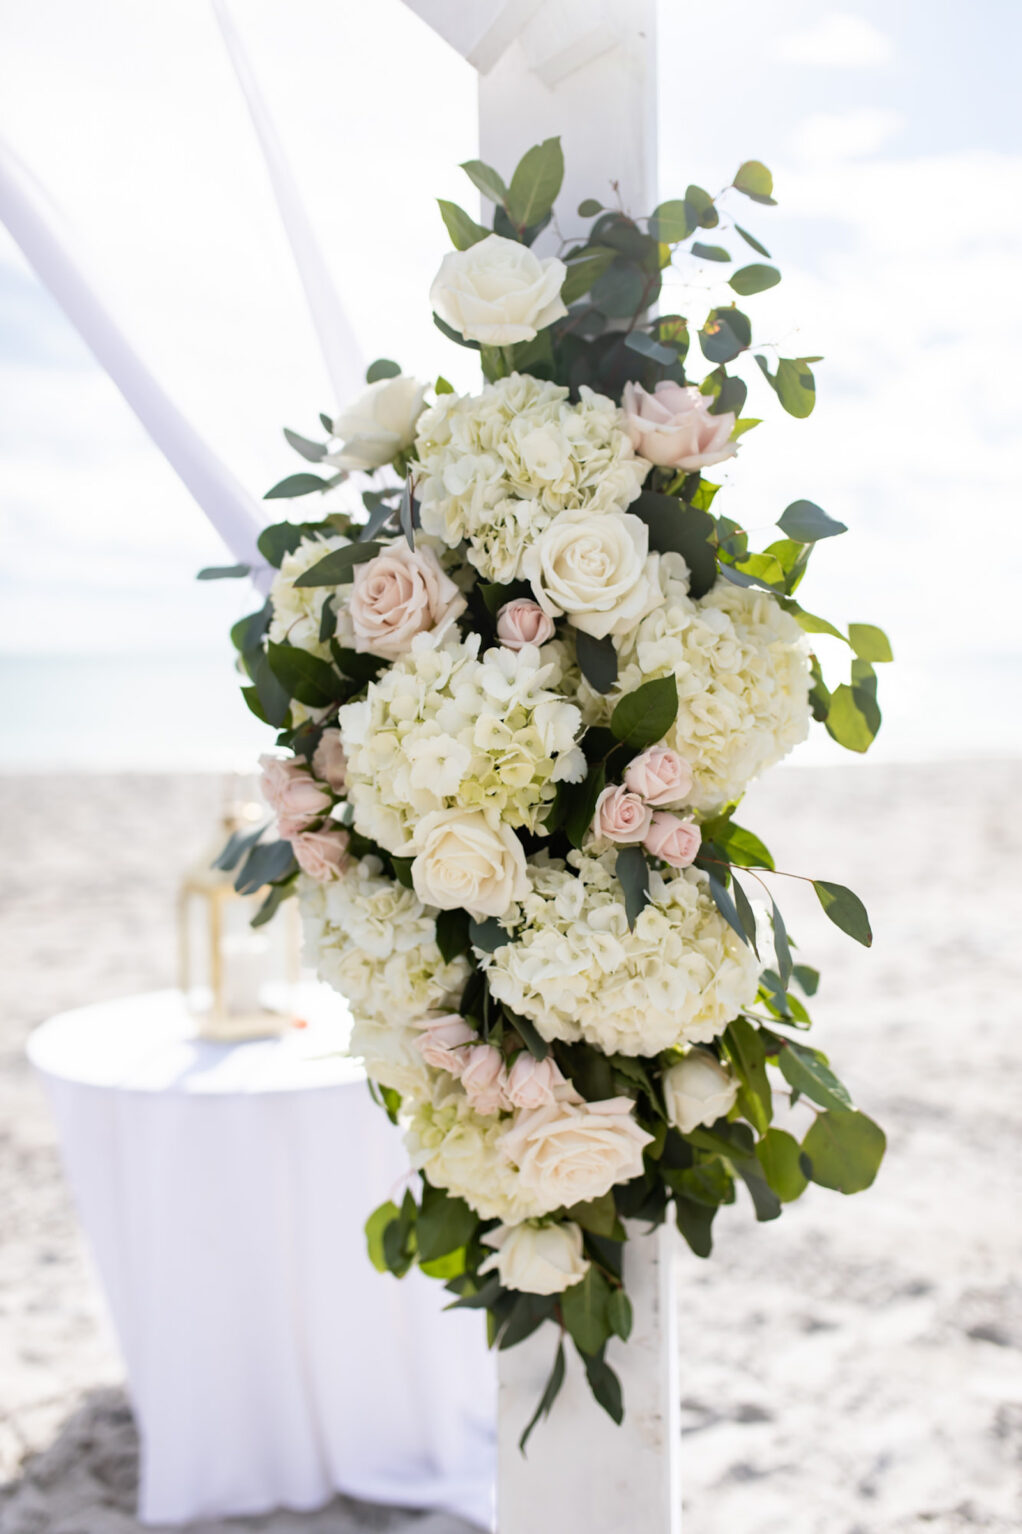 White and Blush Rose Wedding Florals with Greenery in Beachfront Wedding Decor | South Florida Wedding Beach Ceremony the Resort at Longboat Key Club